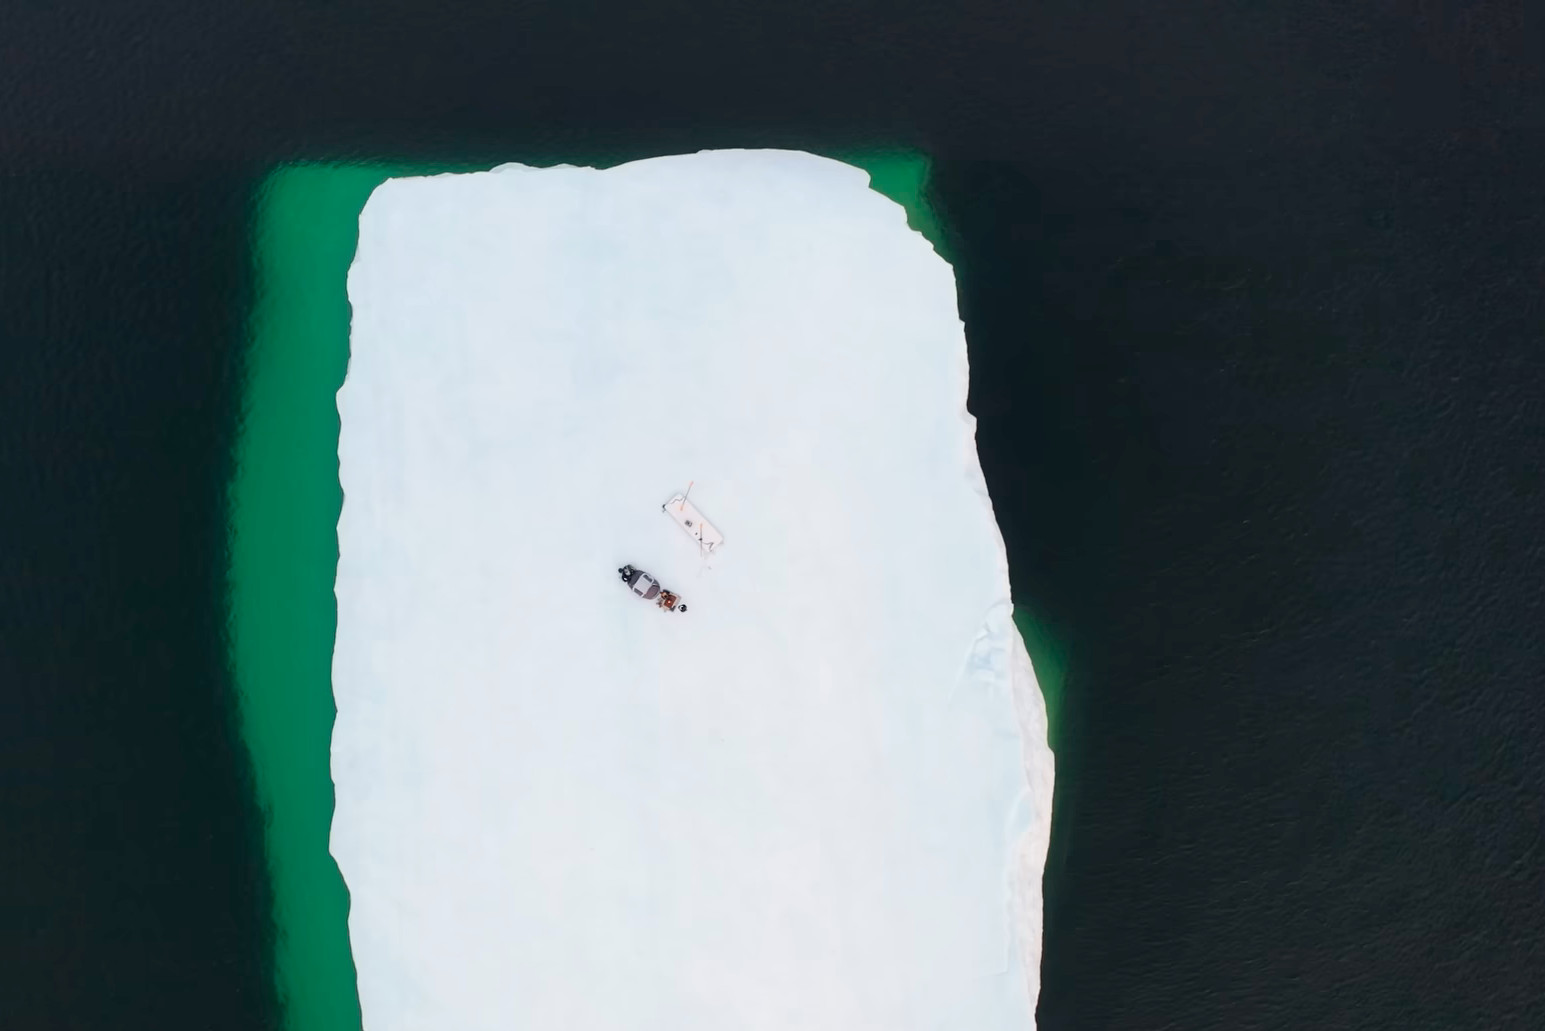 Controversy surrounds a pair of paddlers who went on an iceberg